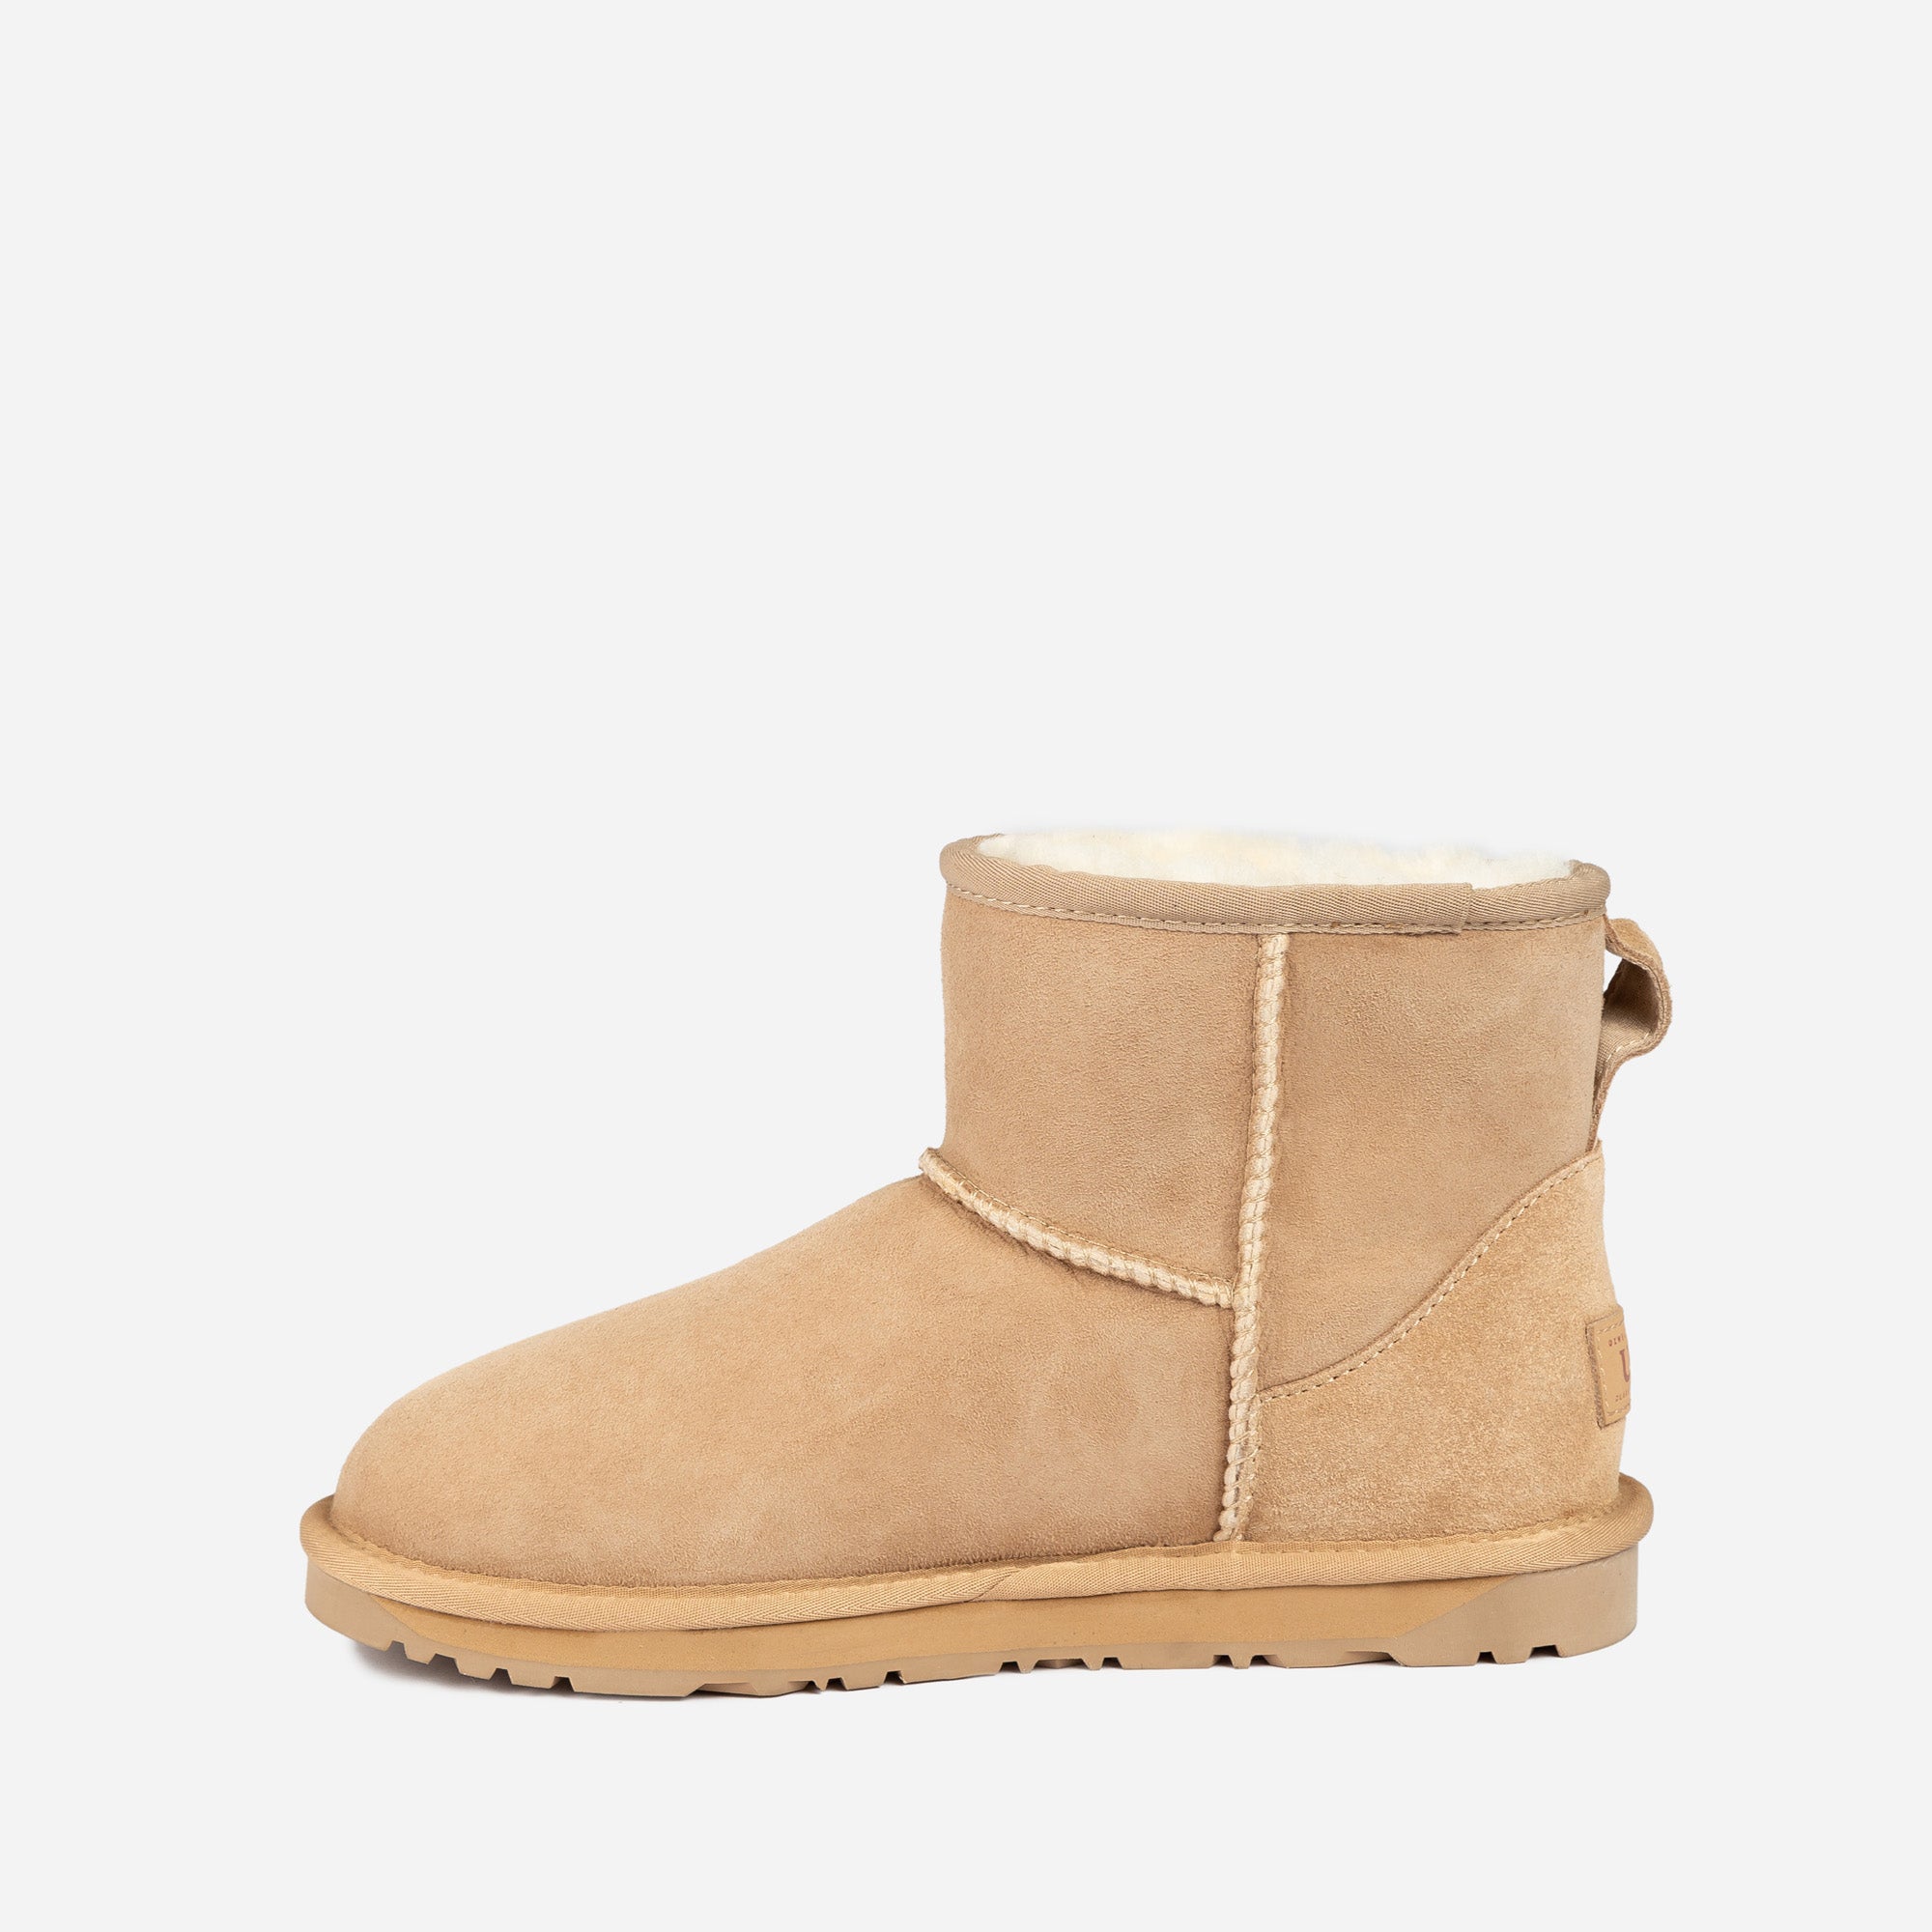 Ugg Classic Mini Boots (Water Resistant)